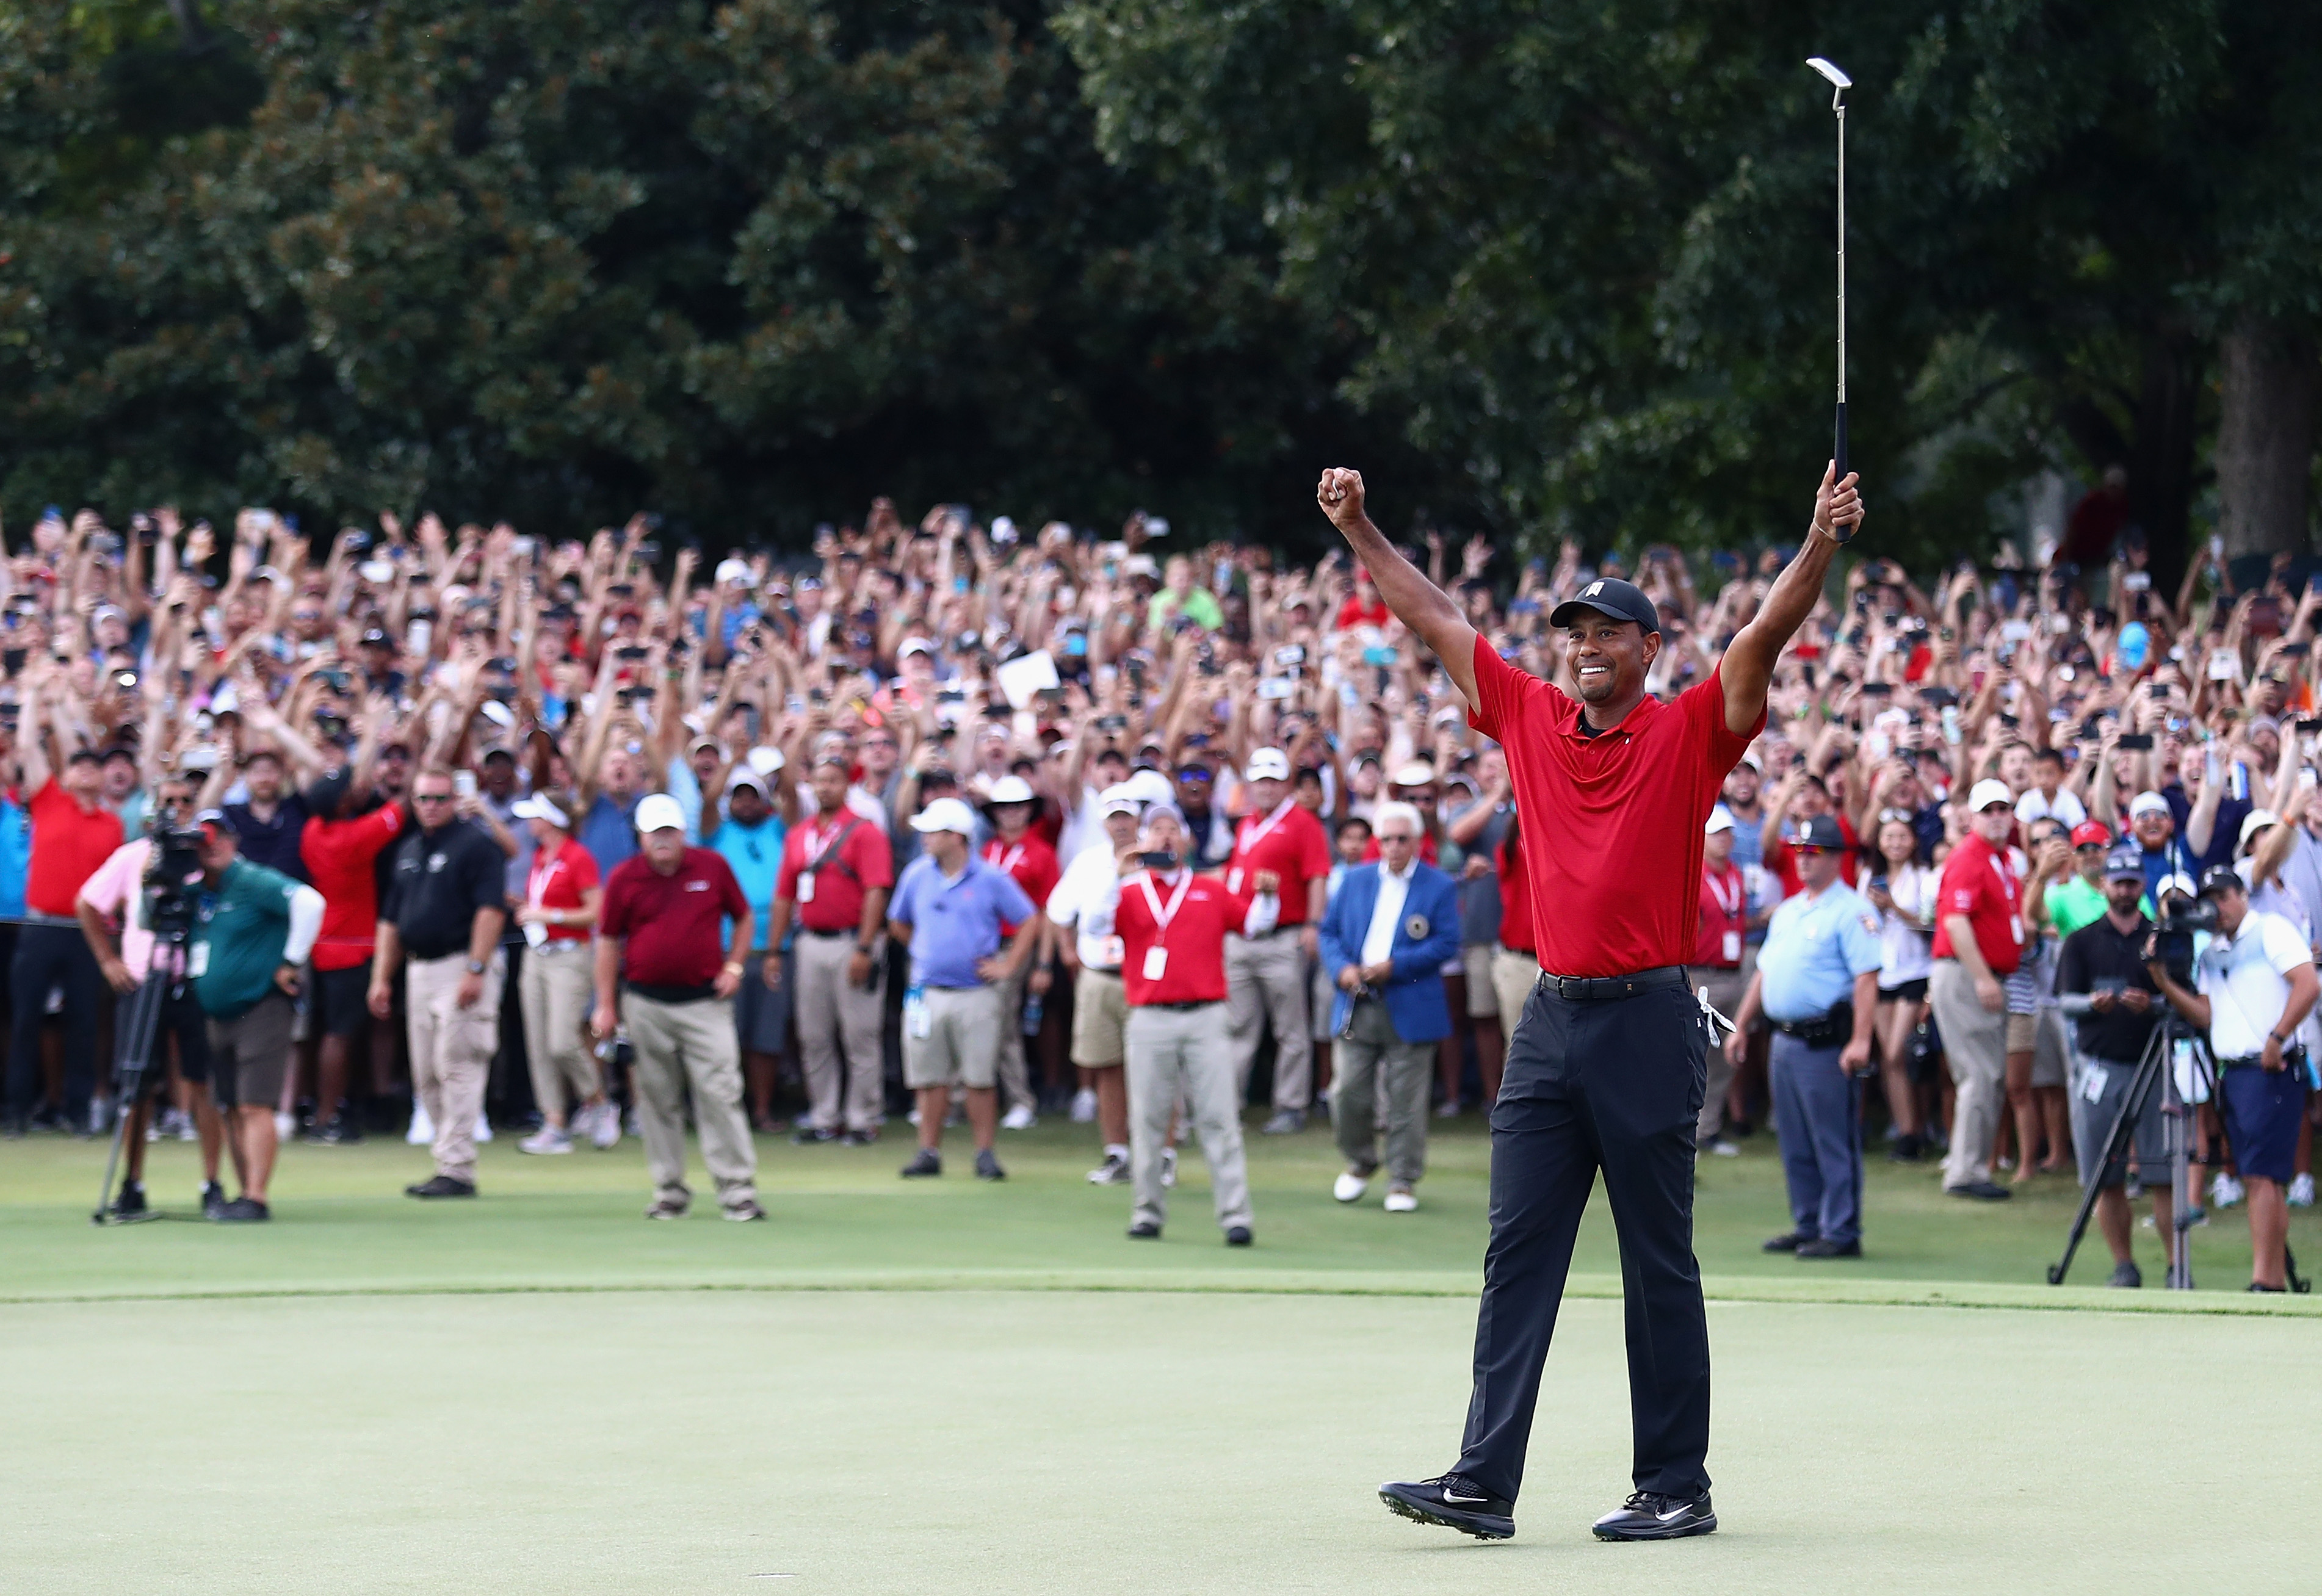 Tiger Woods' Tour Championship Win Best Photos, Videos of Moment